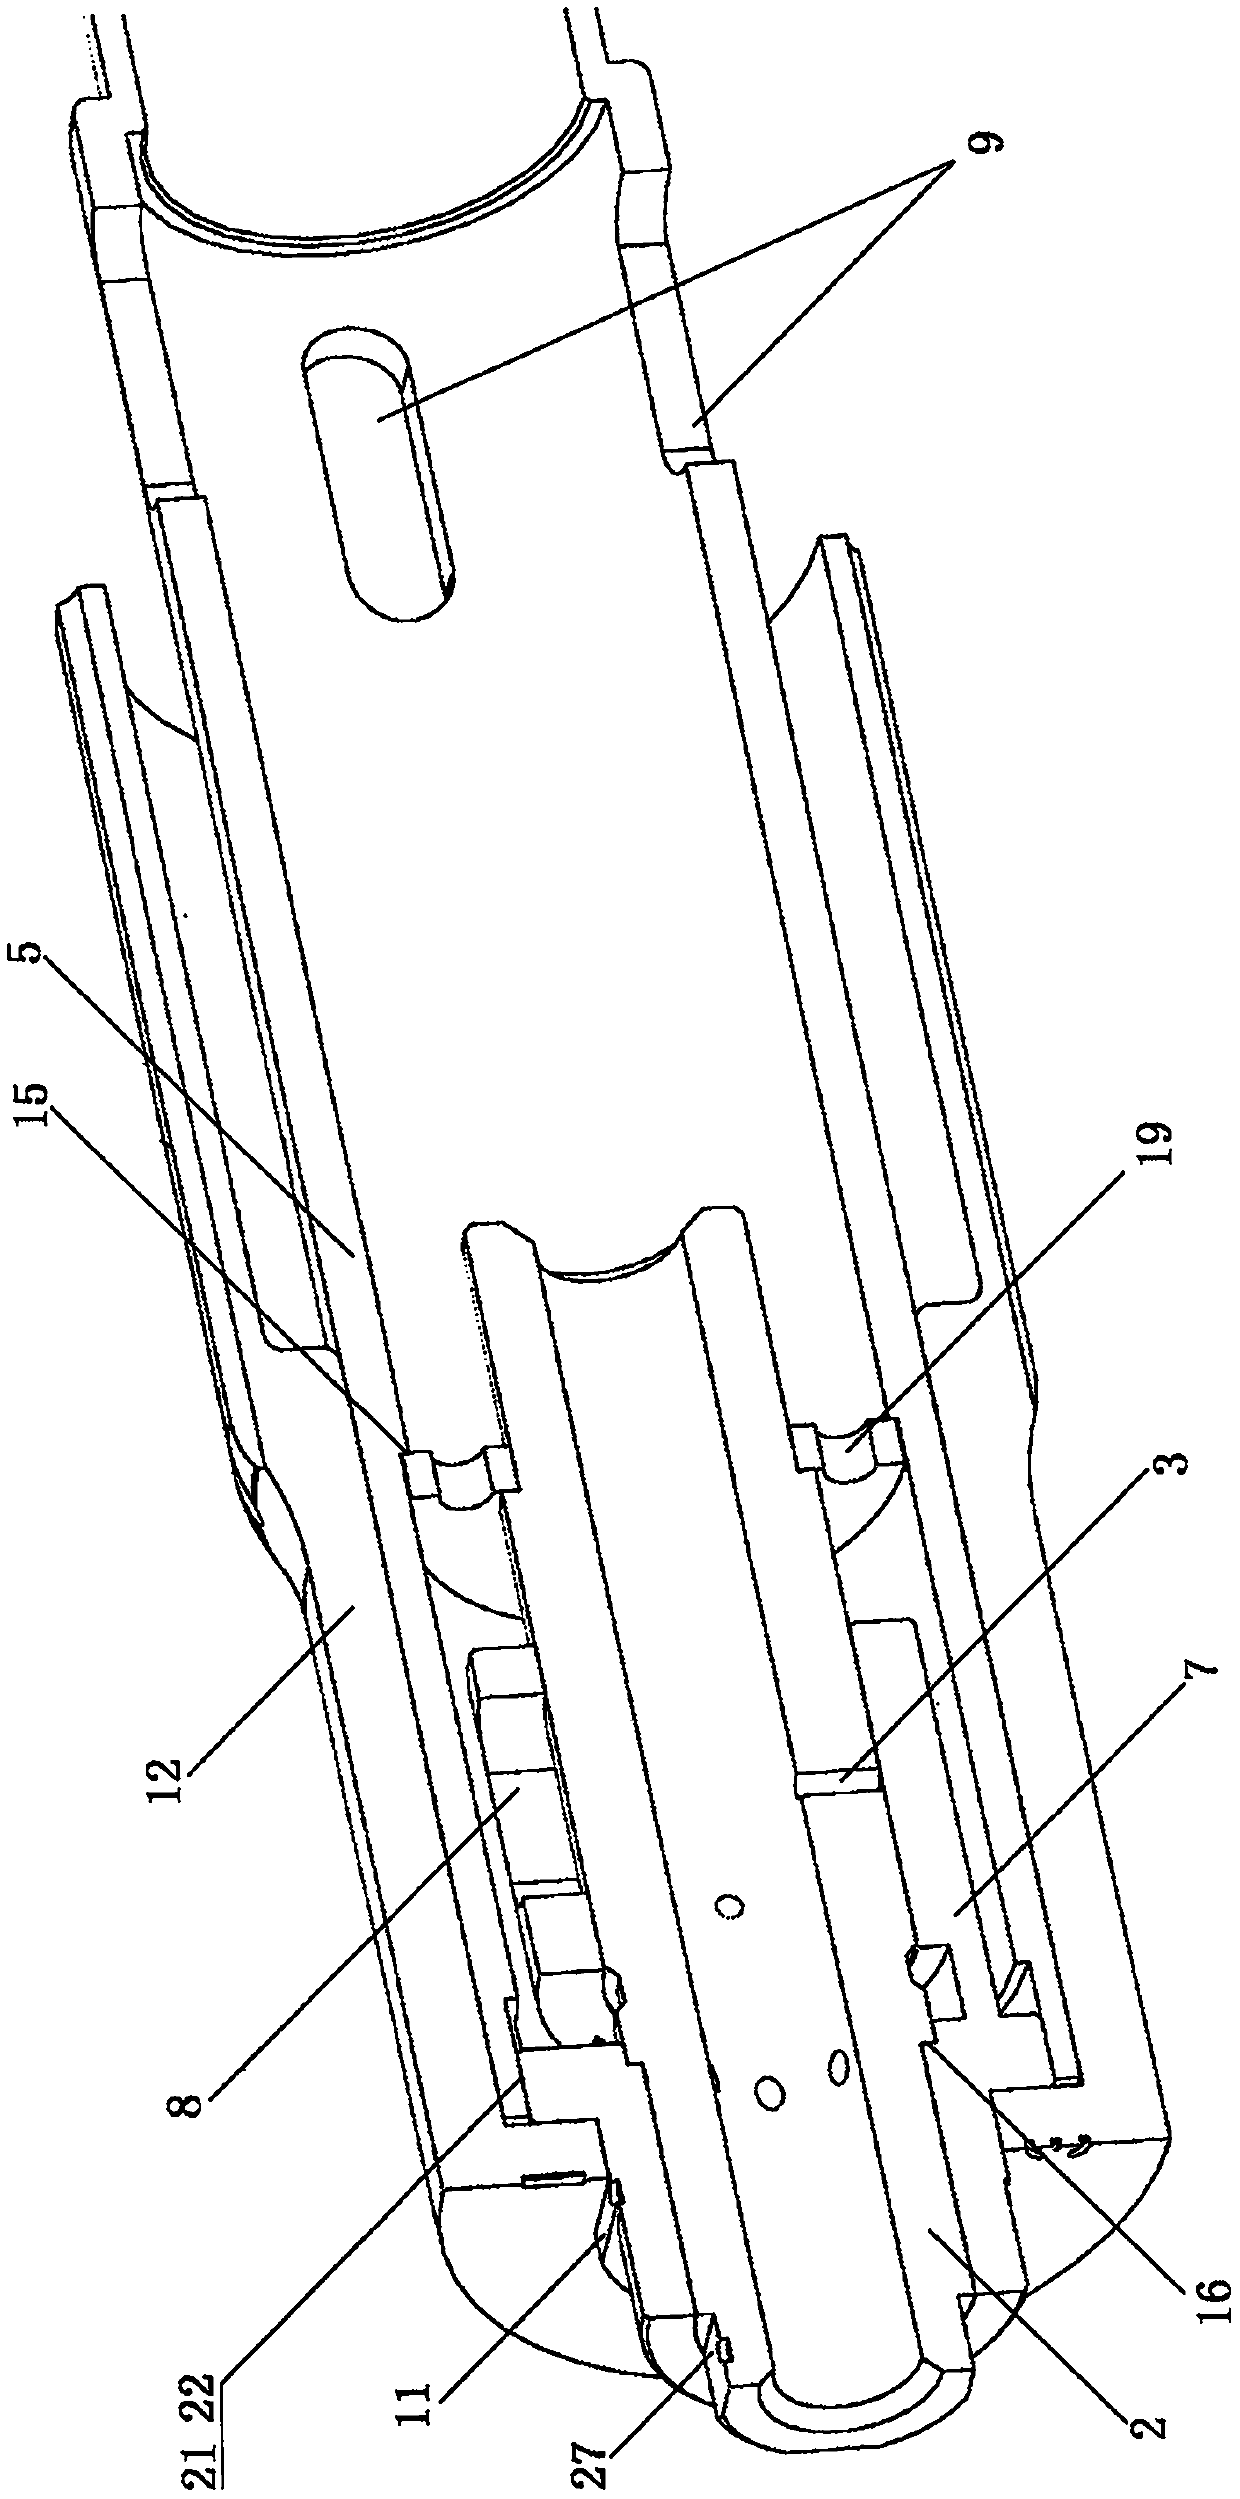 External force adjusting and automatic residue discharging type axial powder actuated tool